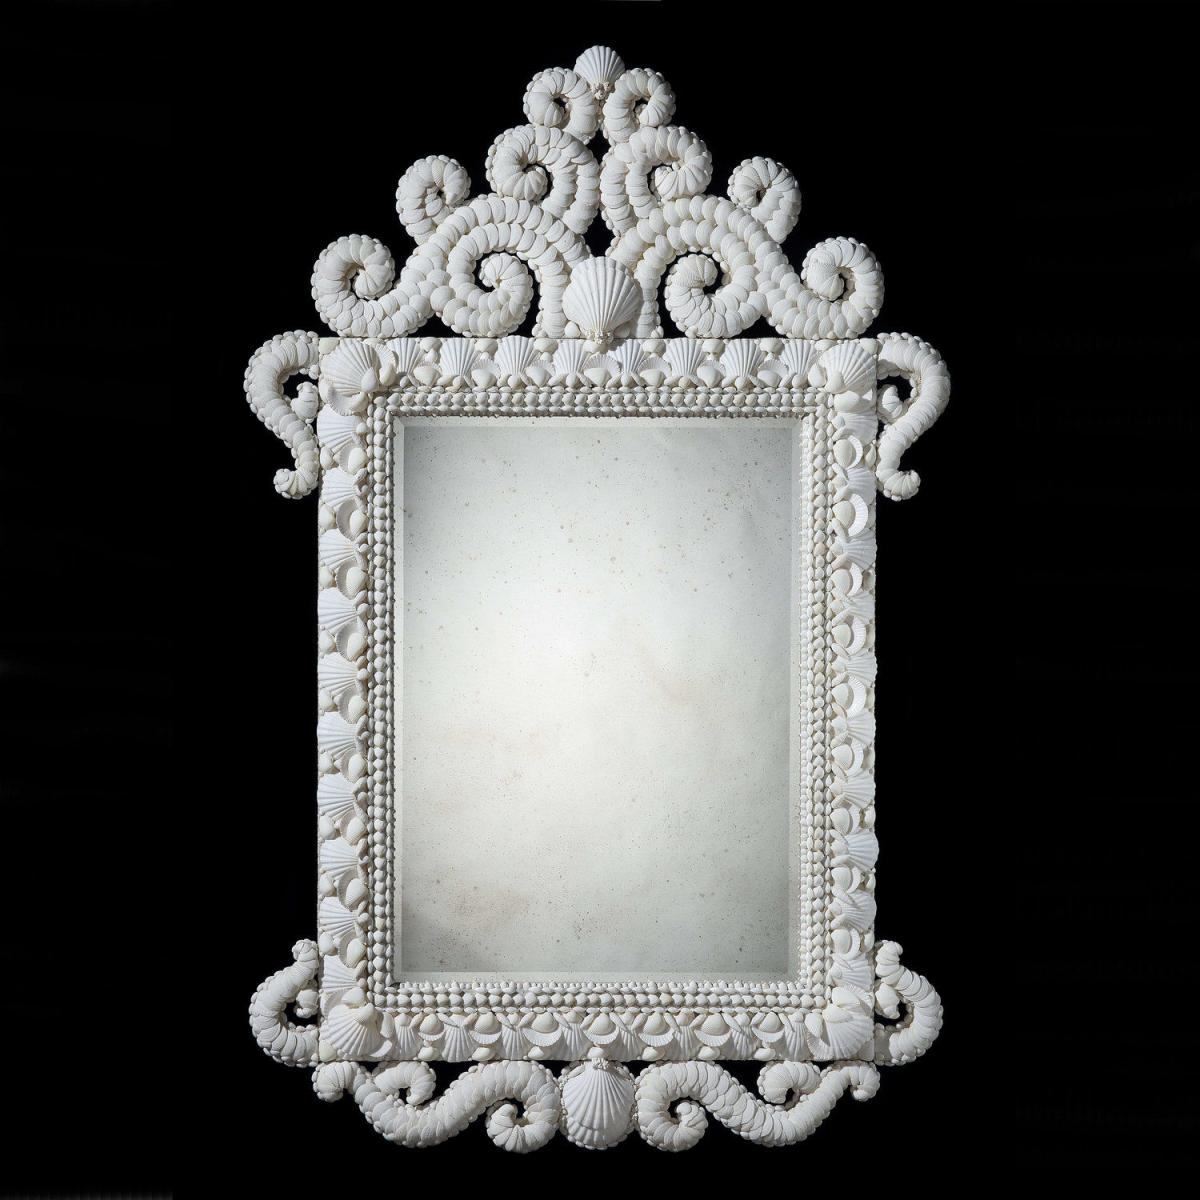 A Fine Large Scale White Shell Mirror